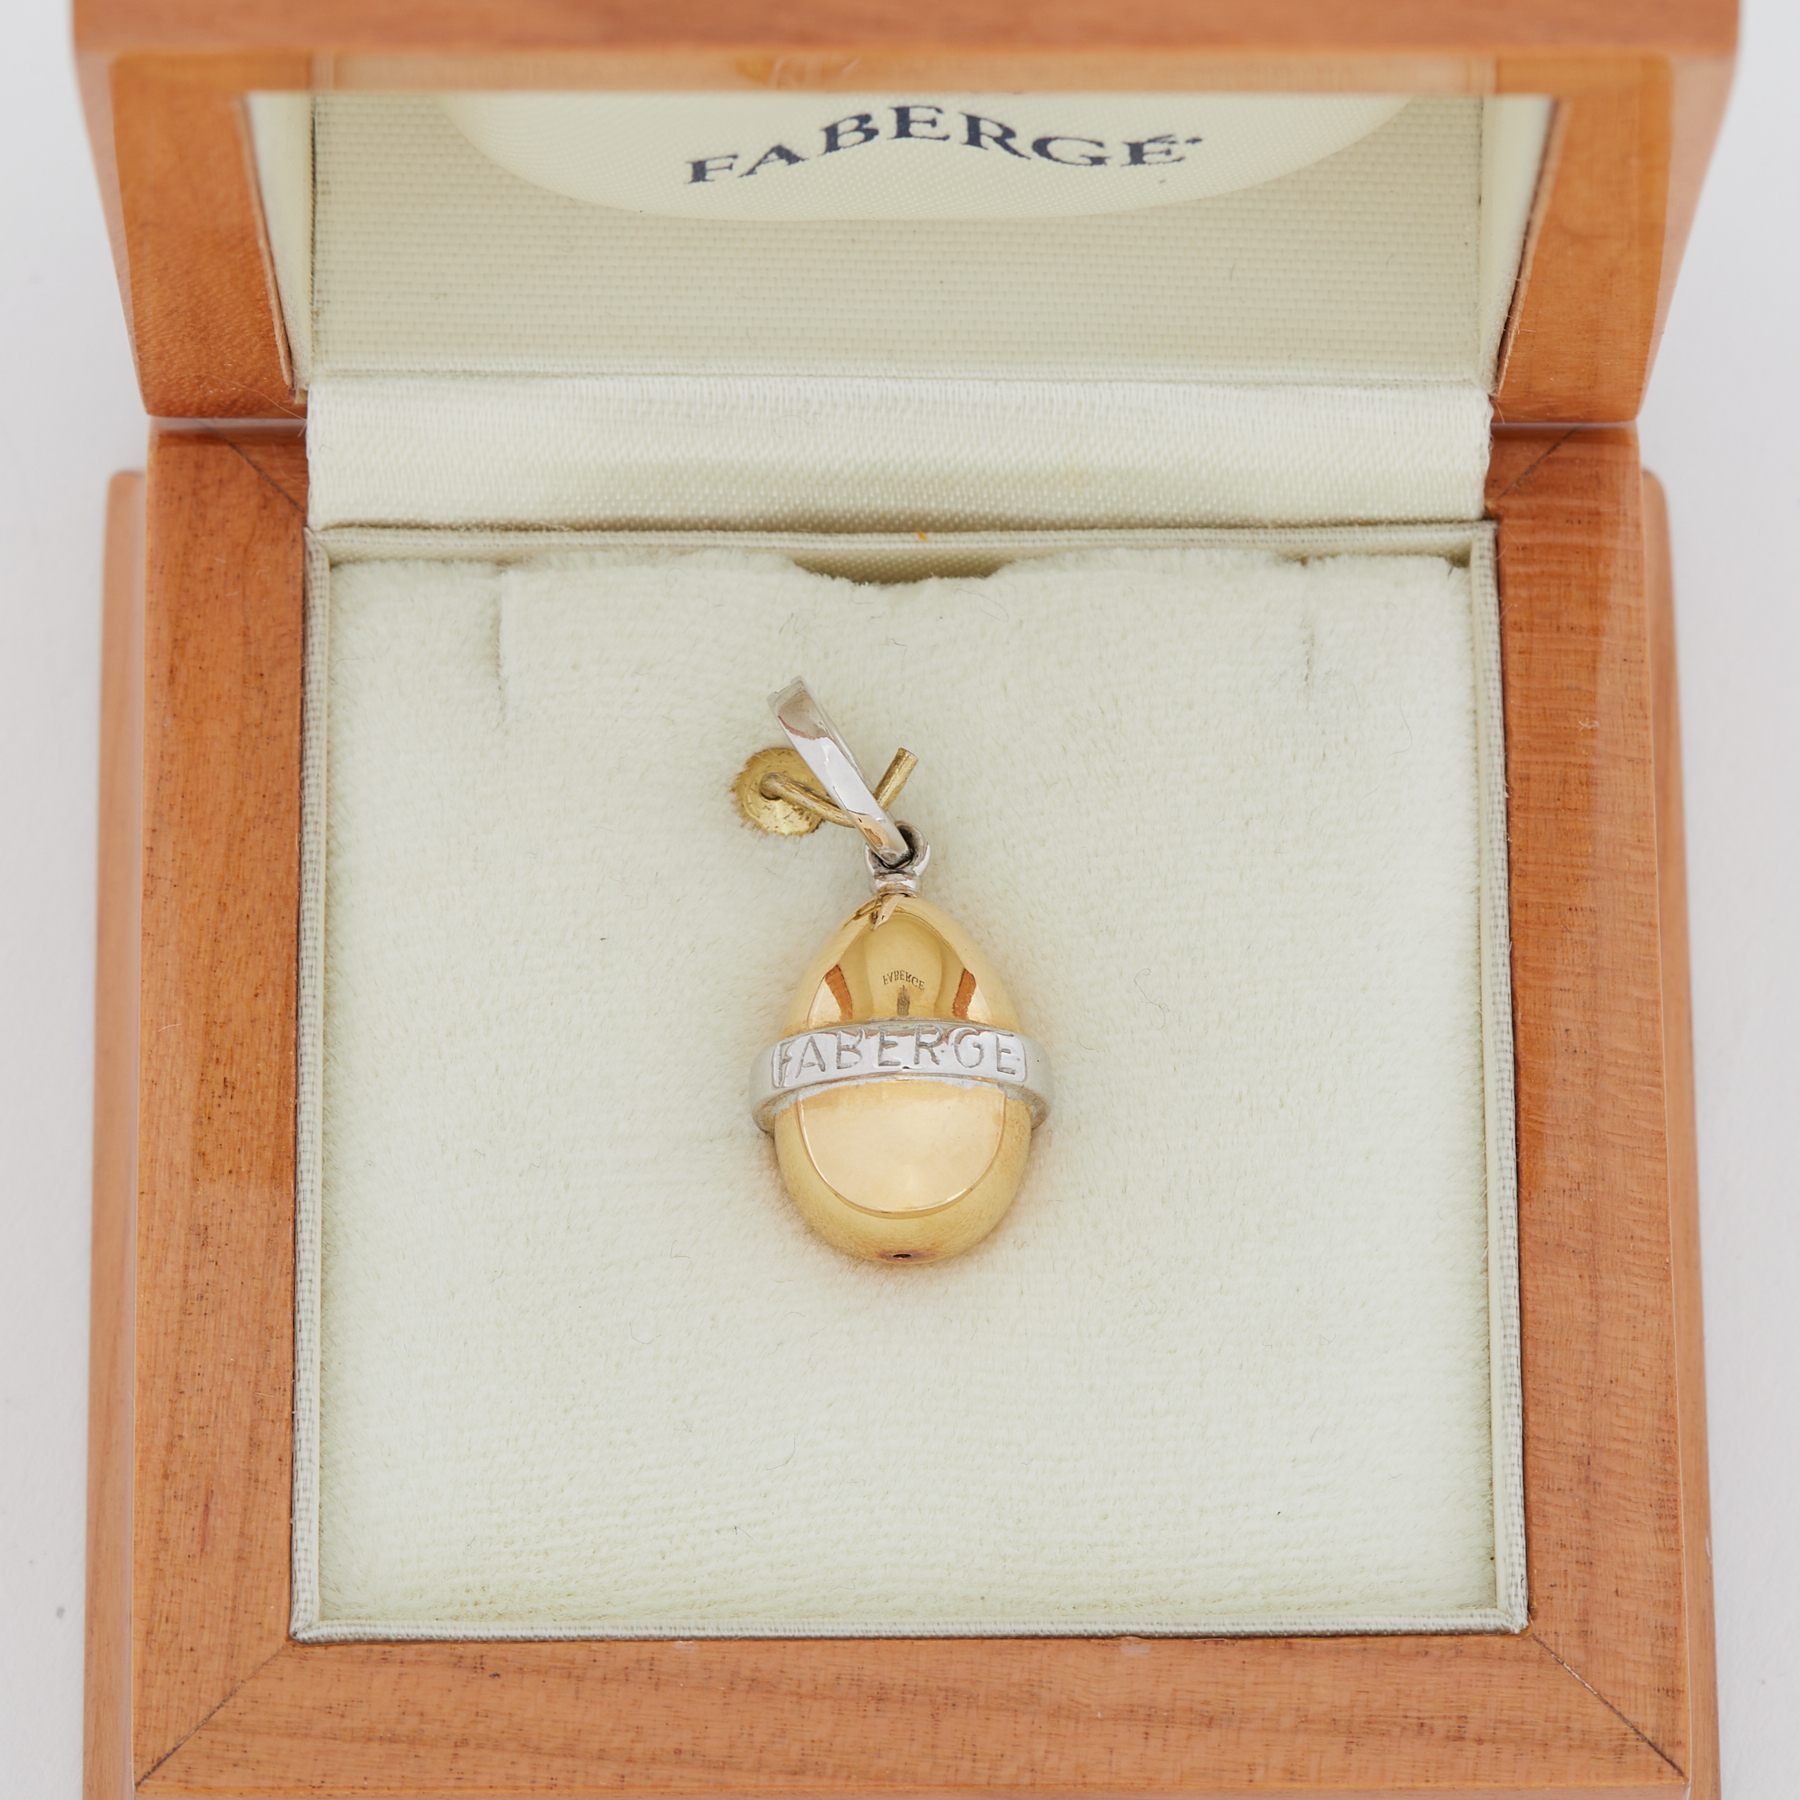 An 18ct yellow & white gold Faberge egg pendant, stamped Faberge, 6.89gm, length including bale - Image 2 of 2